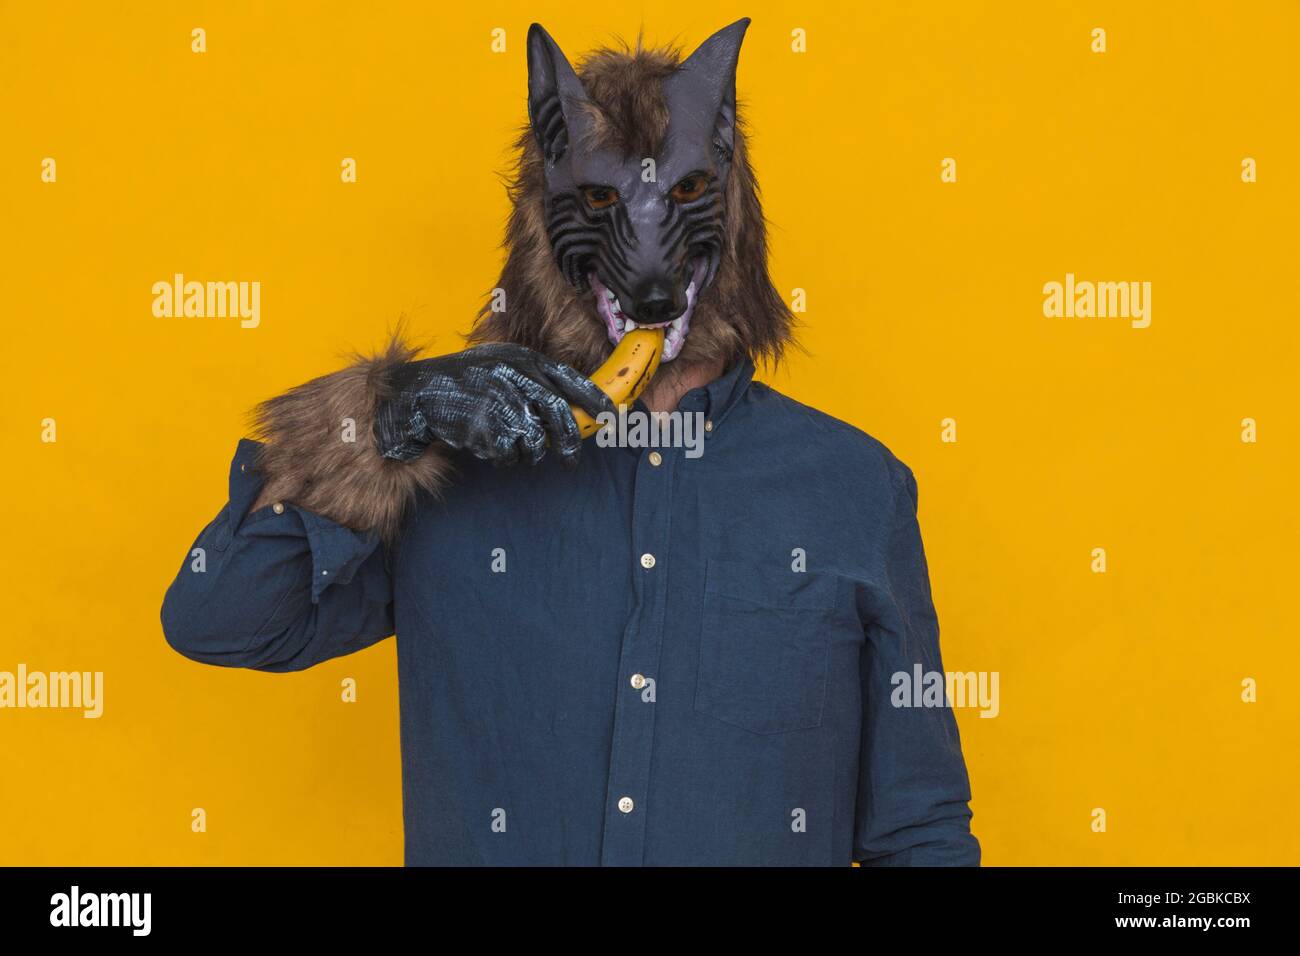 On a yellow background there is a werewolf dressed in a blue shirt holding an unpeeled banana in his hand and stuffing it into his mouth. Stock Photo